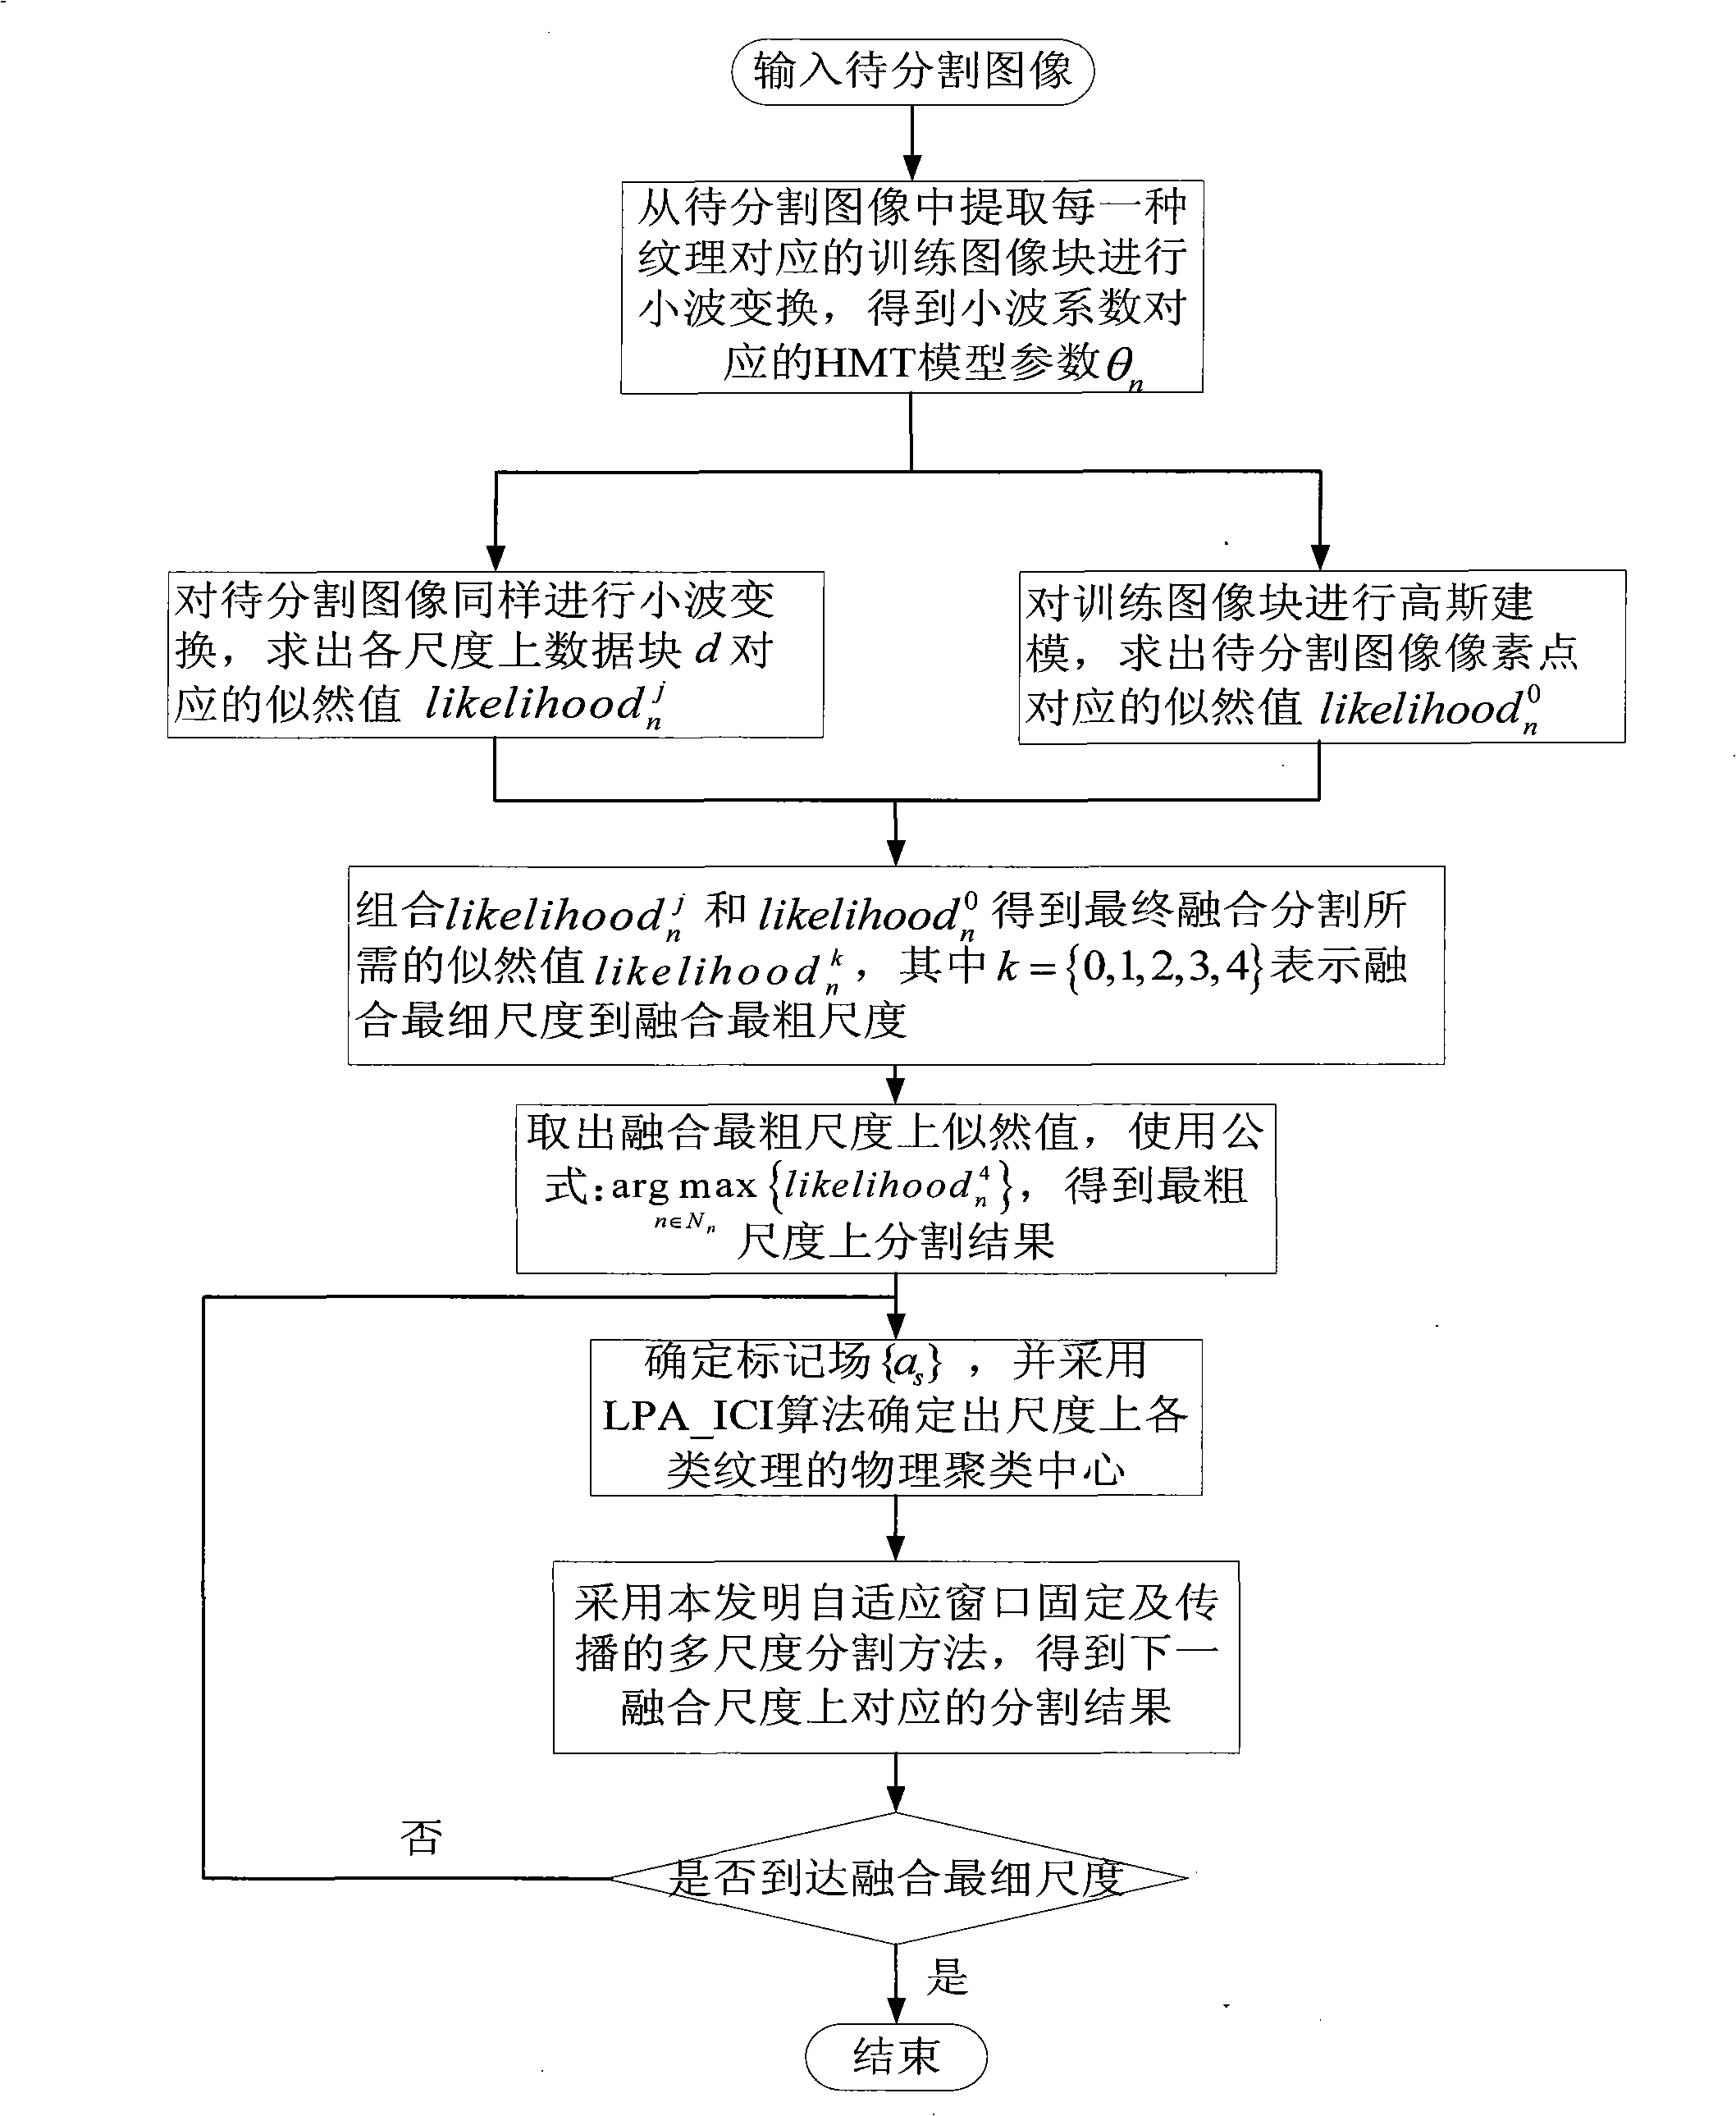 Multi-dimension texture image partition method based on self-adapting window fixing and propagation